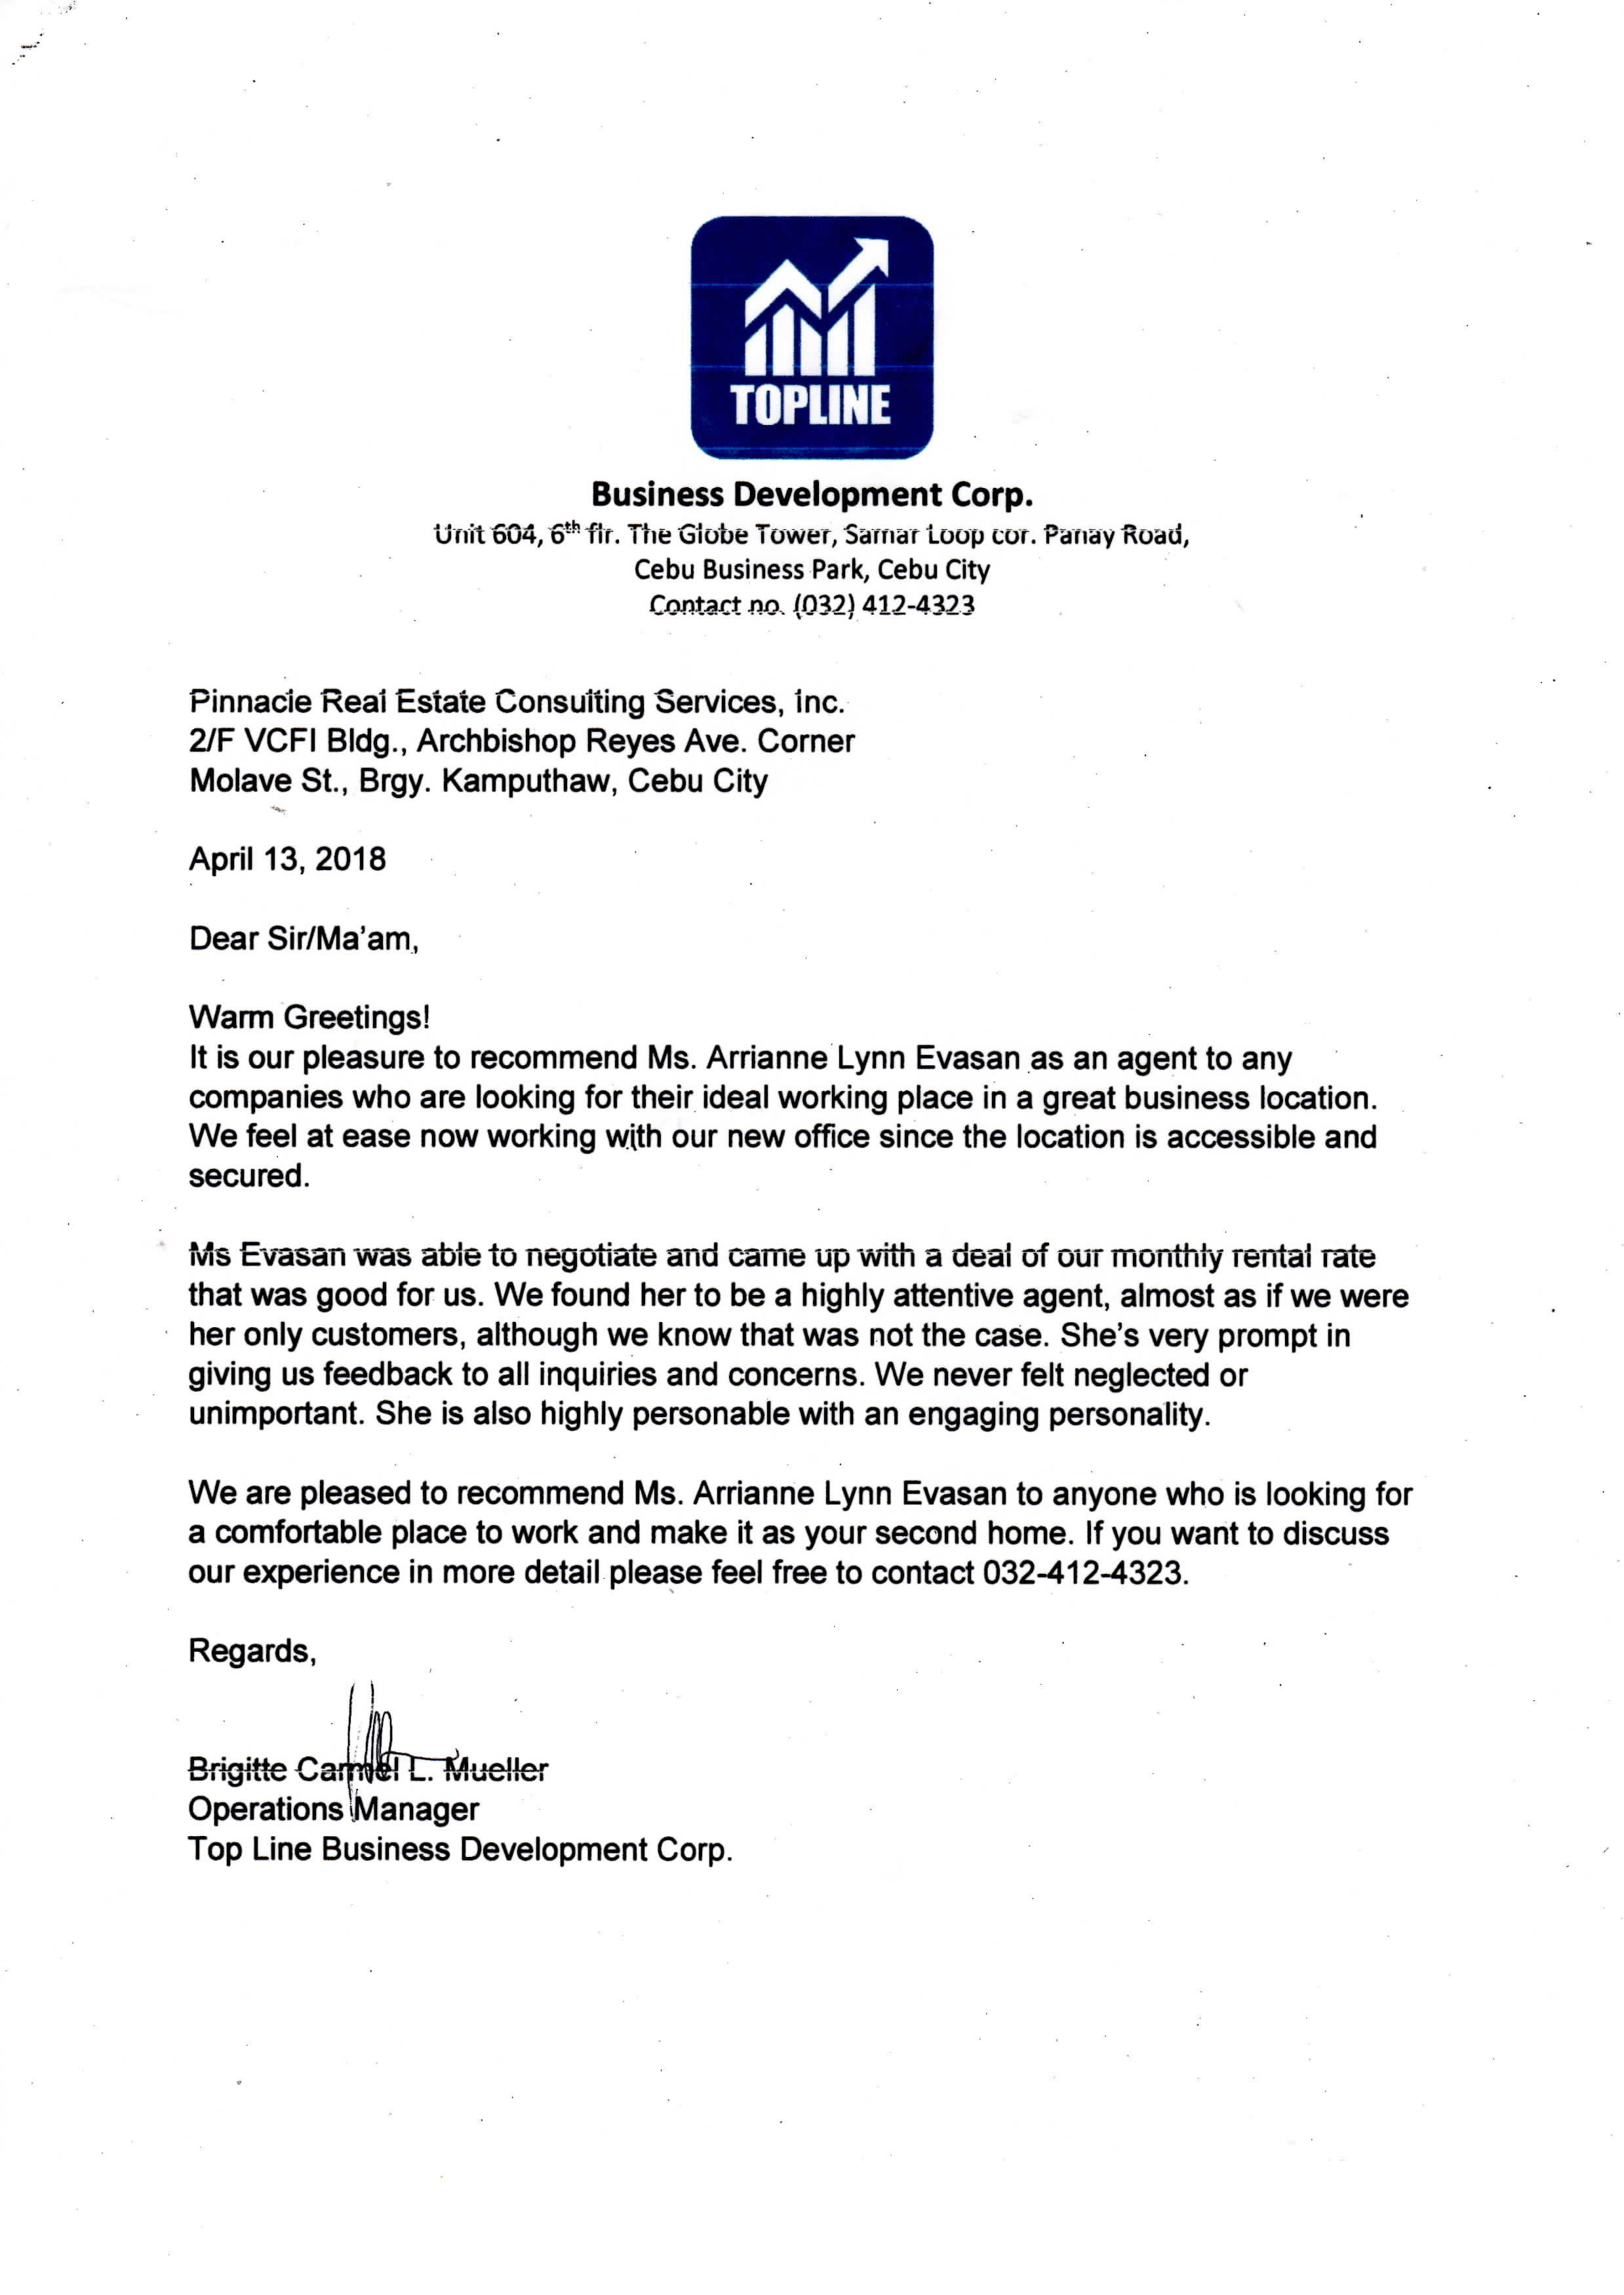 Commendation Letter from Top Line Business Development Corp. to Pinnacle